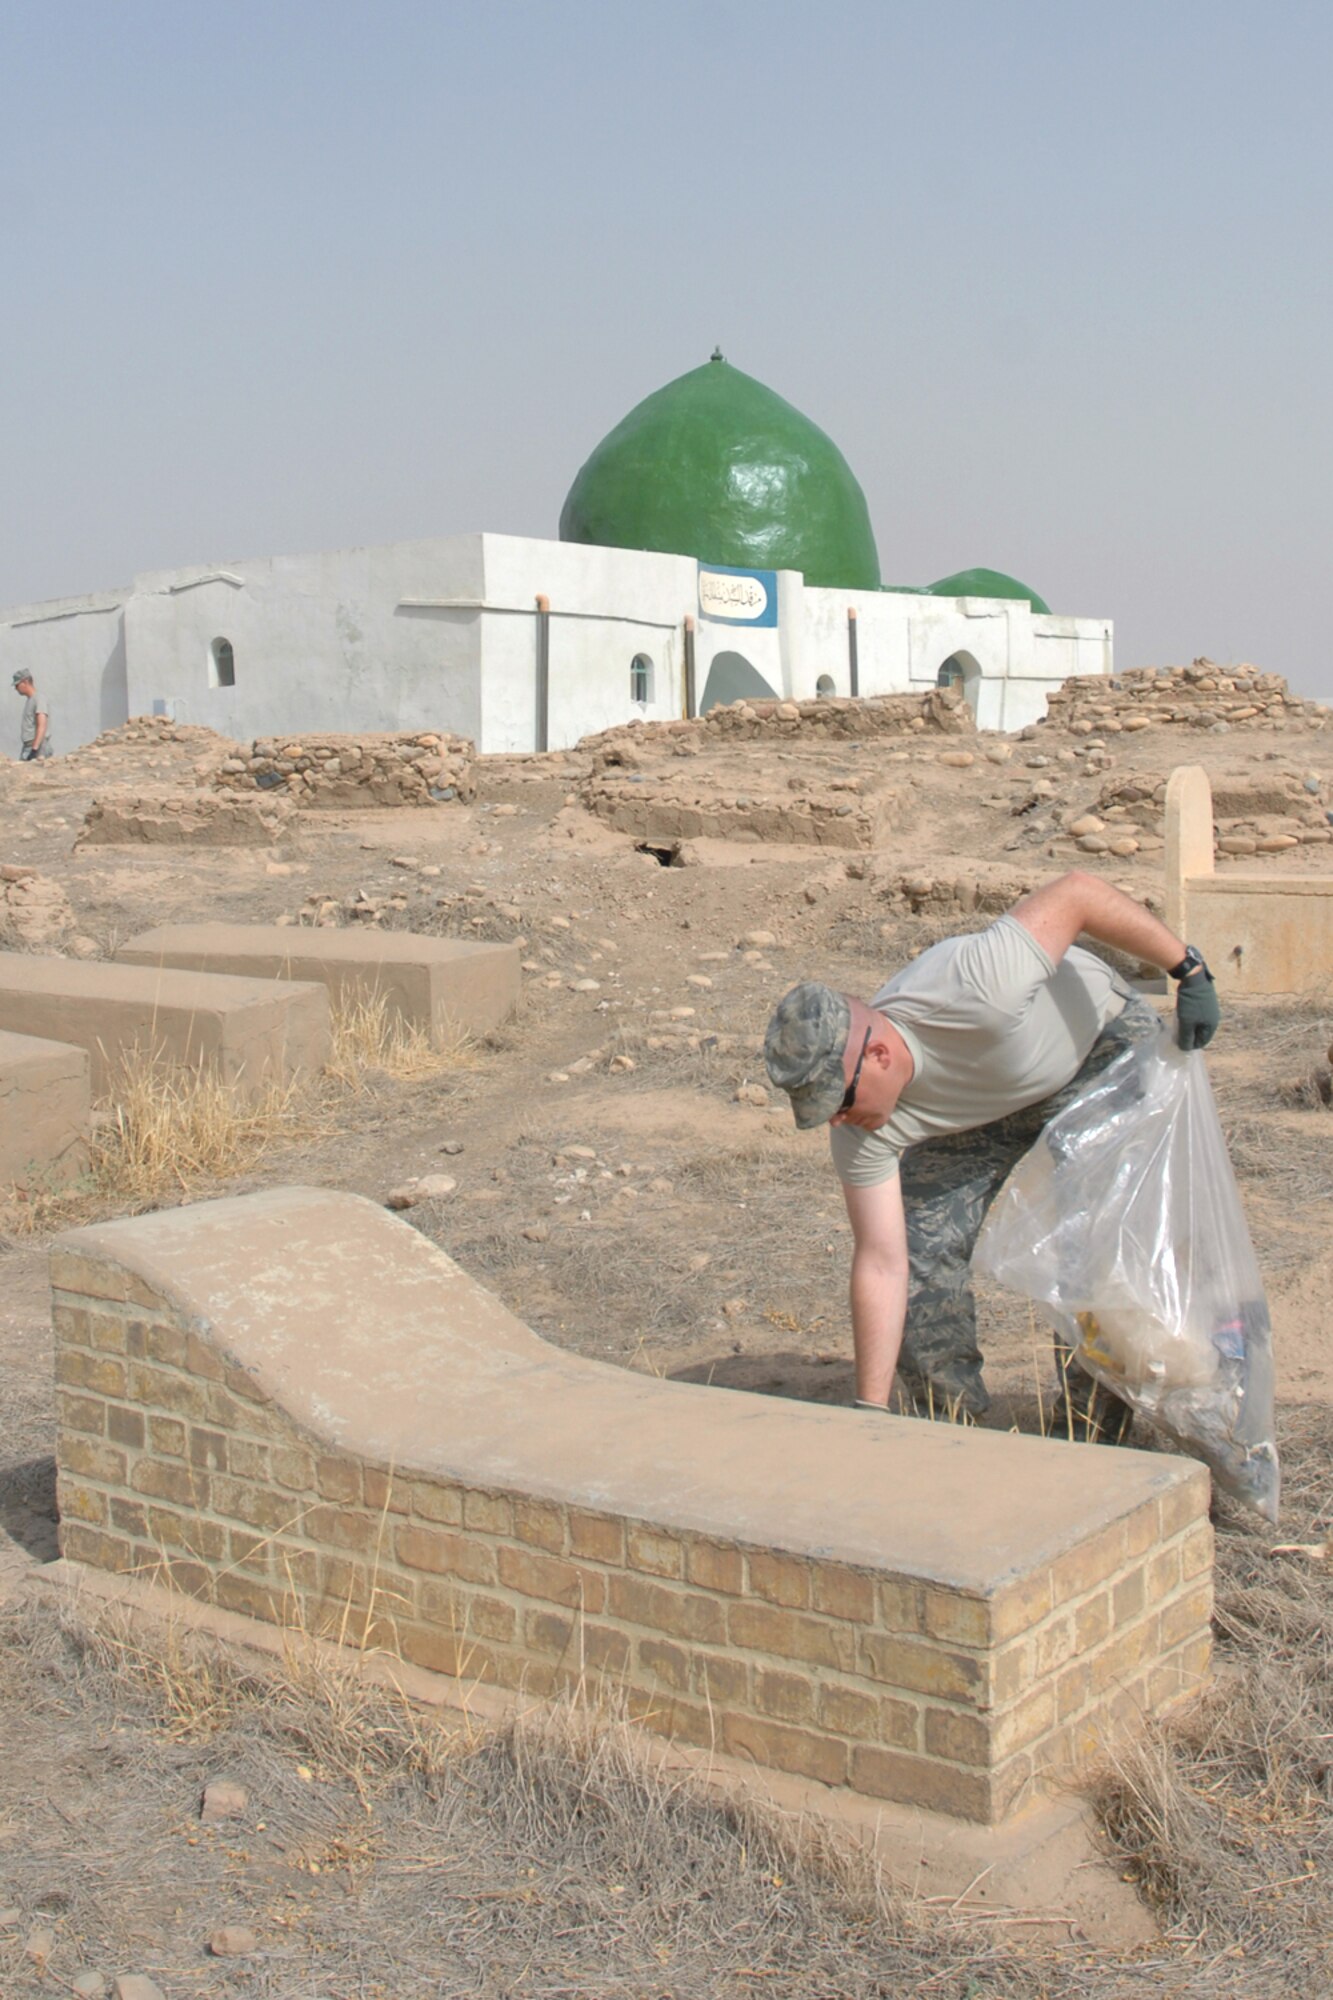 KIRKUK REGIONAL AIR BASE, Iraq – Tech. Sgt. John Wulff, 506th Expeditionary Security Forces Squadron, picks up garbage near a gravesite while volunteering to clean up the Sultan Saqi cemetery here Sept. 18.  Sixteen volunteer Airmen from the 506th ESFS took part in the cleanup in preparation for the end of the month of Ramadan.  Sergeant Wulff is deployed here from the 446nd SFS, McChord Air Force Base, Wash. (U.S. Air Force photo/Staff Sgt. Daniel Martinez)  